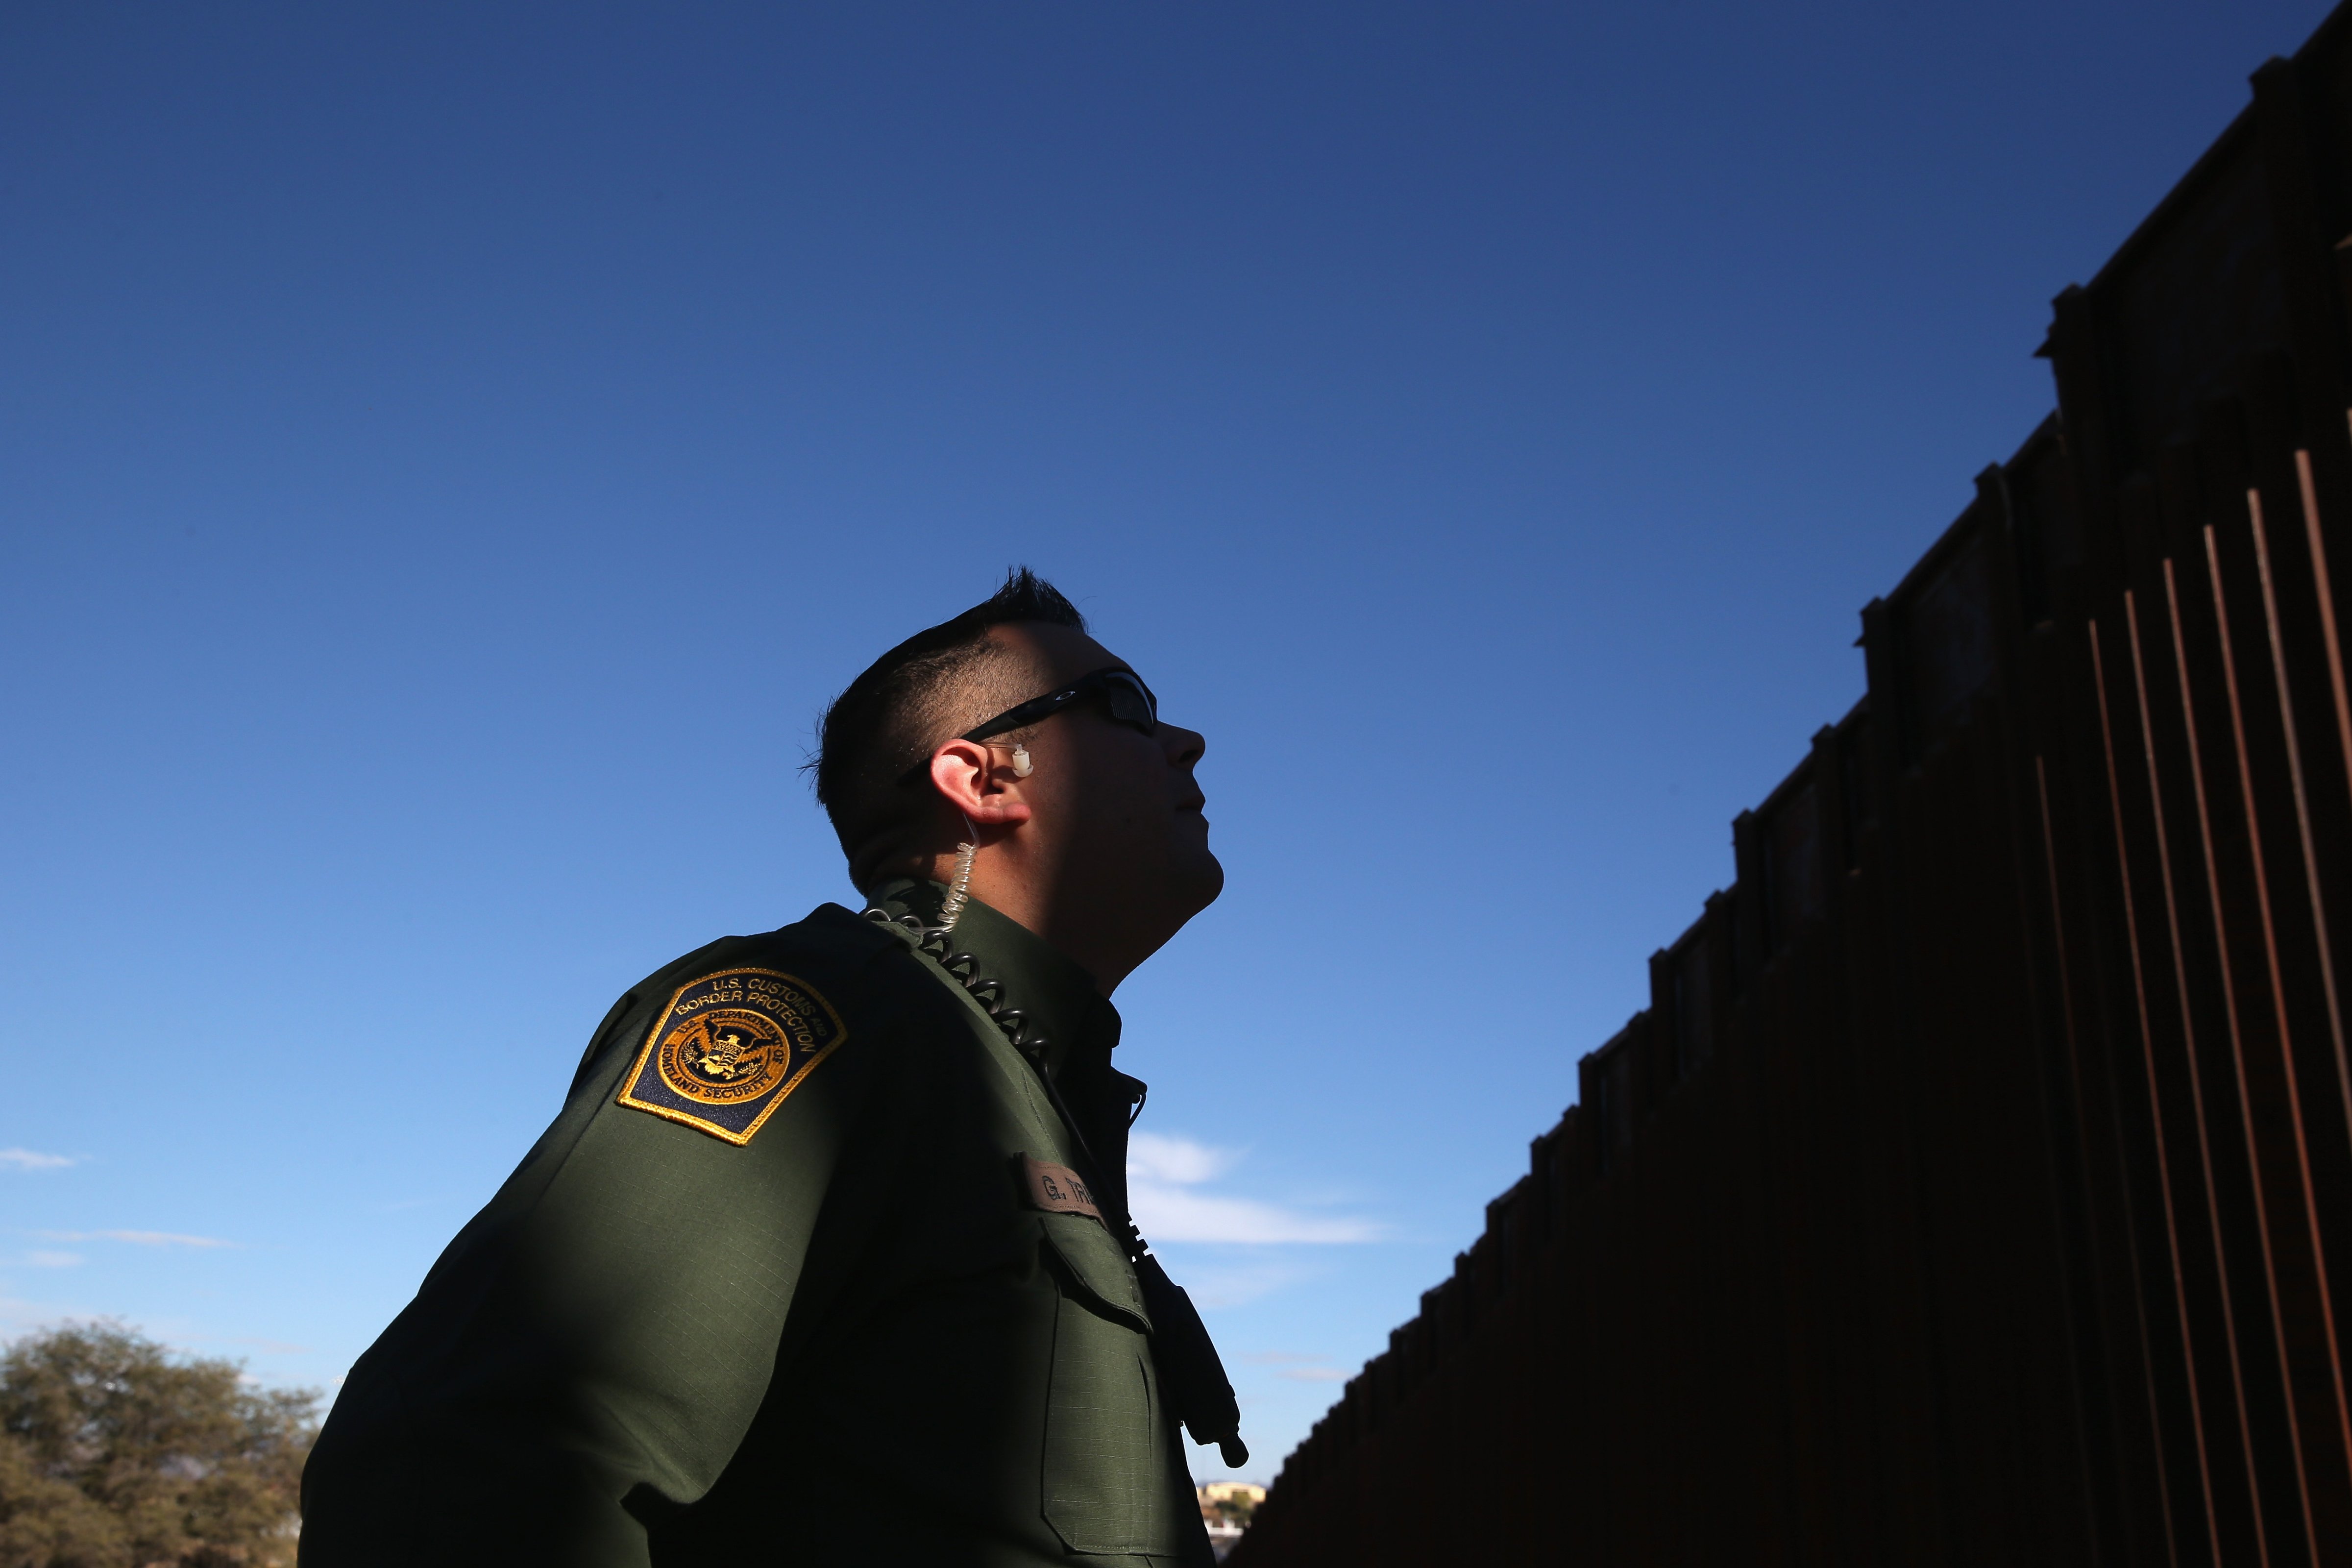 A U.S. Border Patrol agent stands next to the U.S.-Mexico border fence on Dec. 9, 2014 in Nogales, Ariz. (John Moore&mdash;Getty Images)